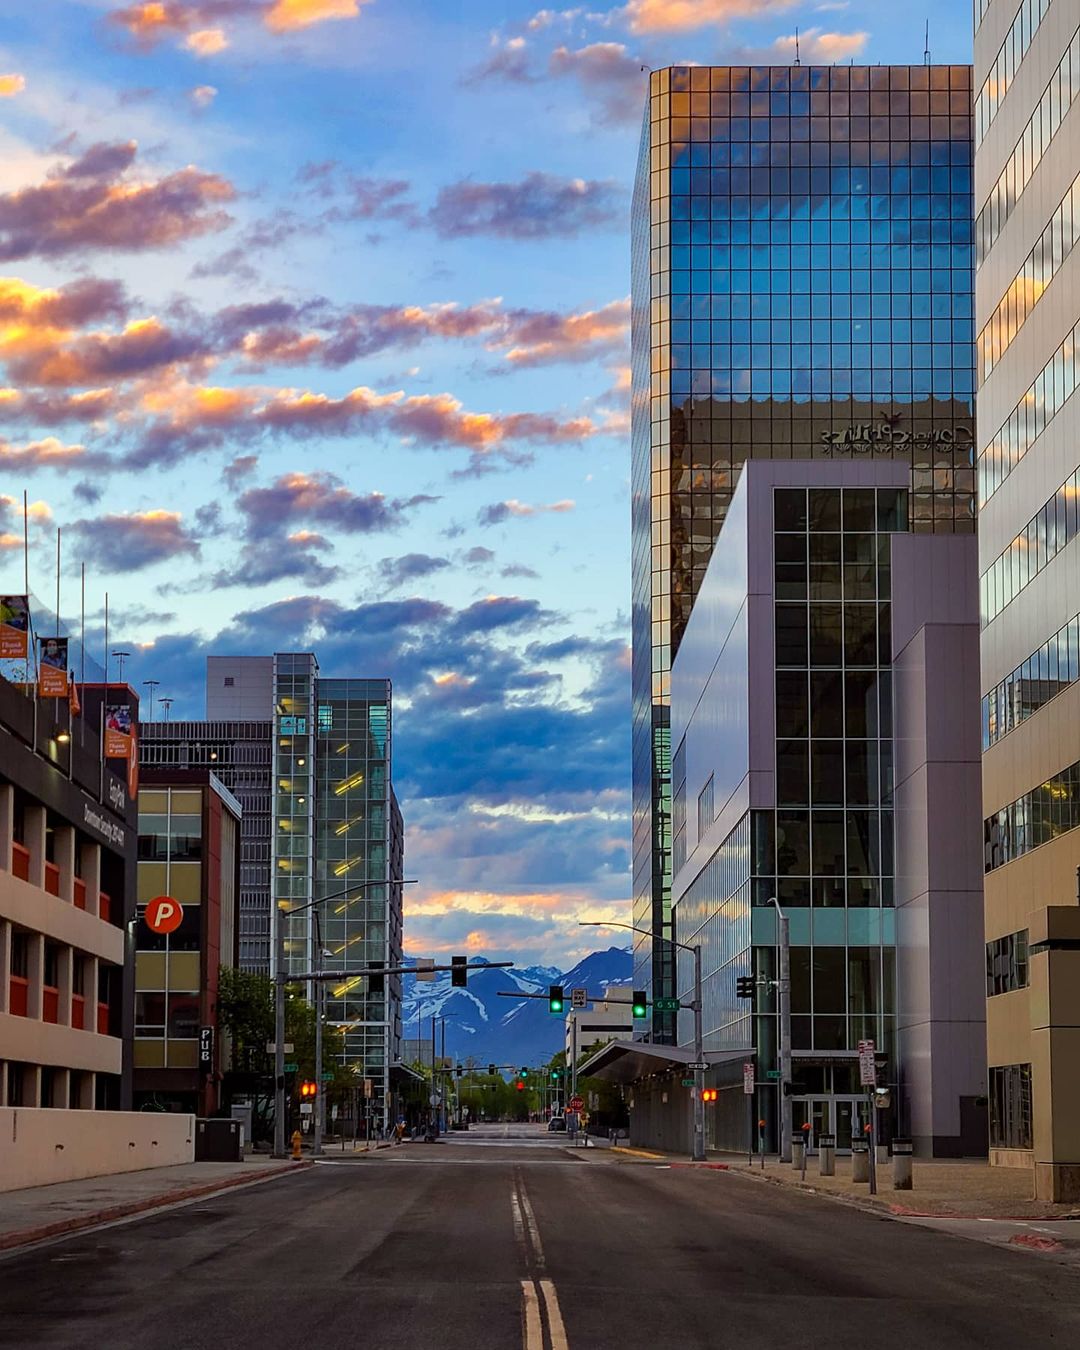 Exterior shot of Downtown Anchorage Alaska in the morning with glass buildings in foreground and clouds and snowy mountains in background | Photo by Instagram user @ rossow_photography_